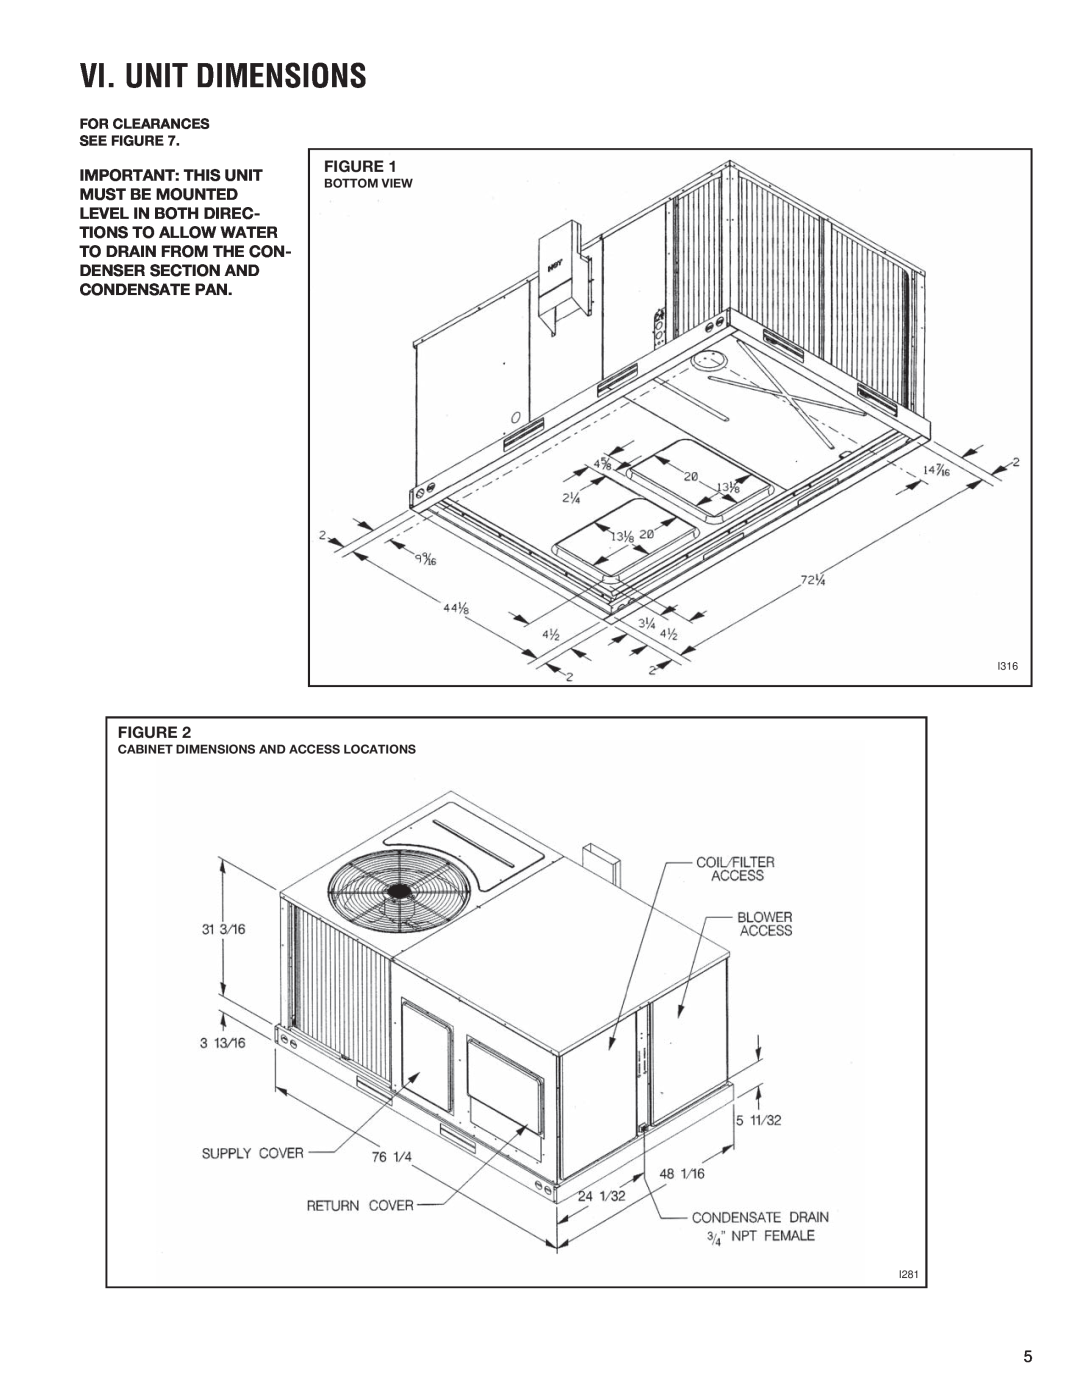 Heat Controller A-13 Vi. Unit Dimensions, For Clearances See Figure, Bottom View, Cabinet Dimensions And Access Locations 